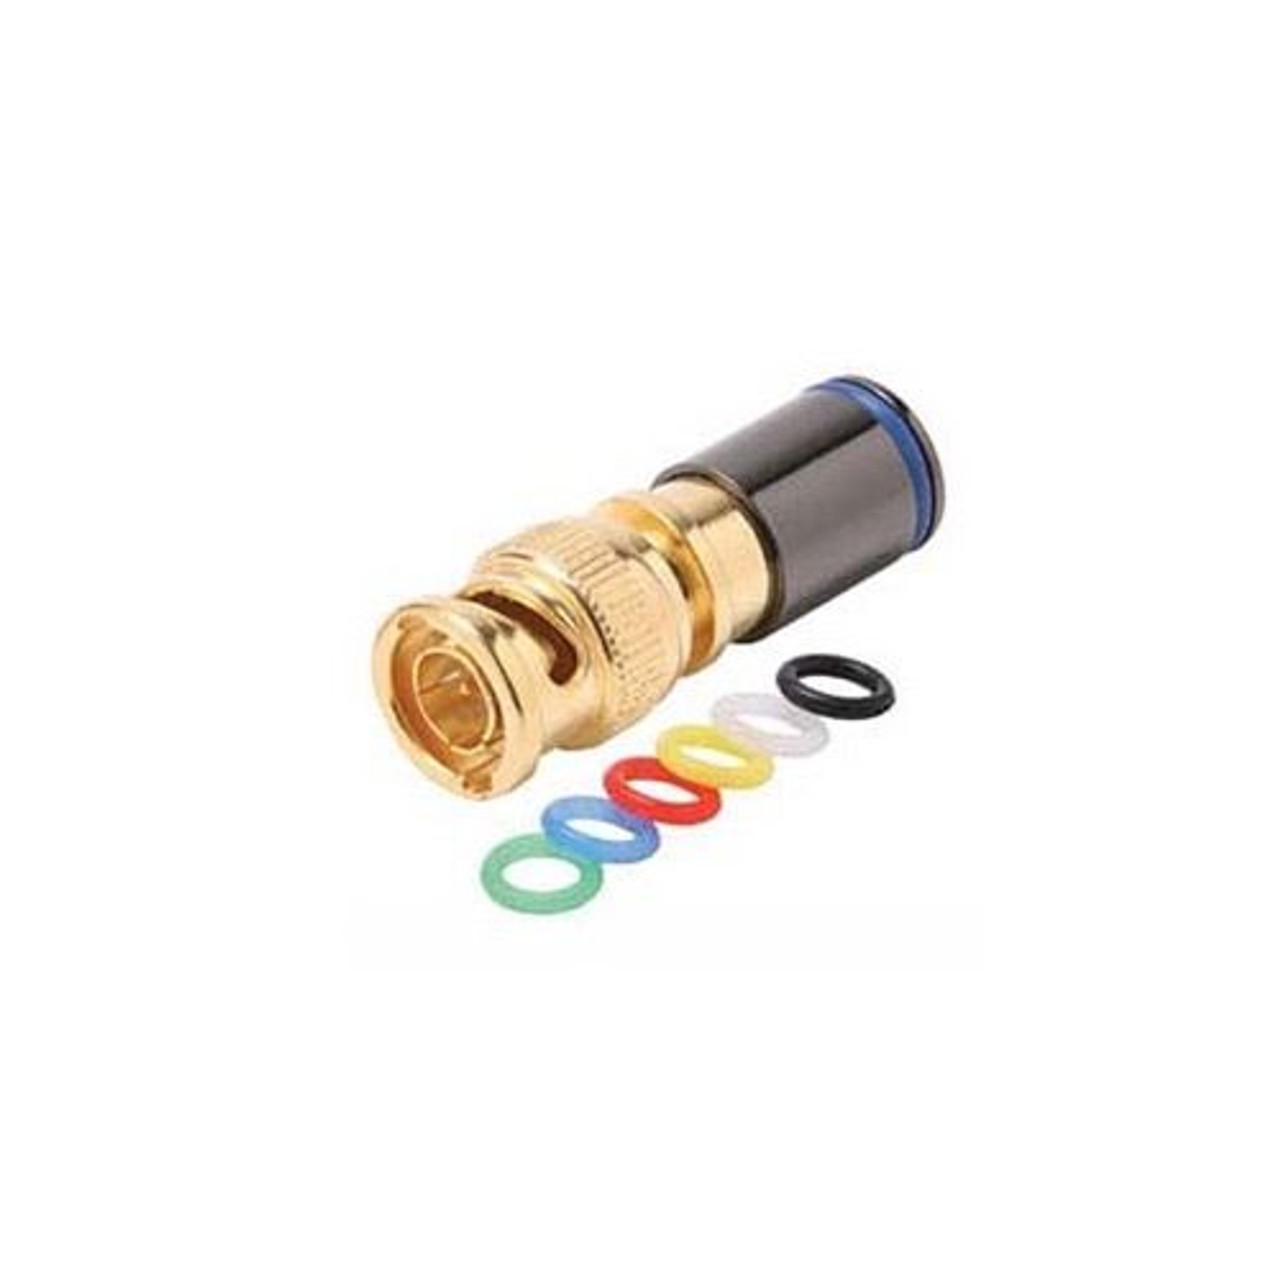 Eagle BNC Compression Quad RG-6 Connector Gold with 6 Color Bands Permaseal II Gold Plate Coaxial Cable Snap-On Line Plug Adapter, RF Digital Audio Video RG6 Quad Component Connection